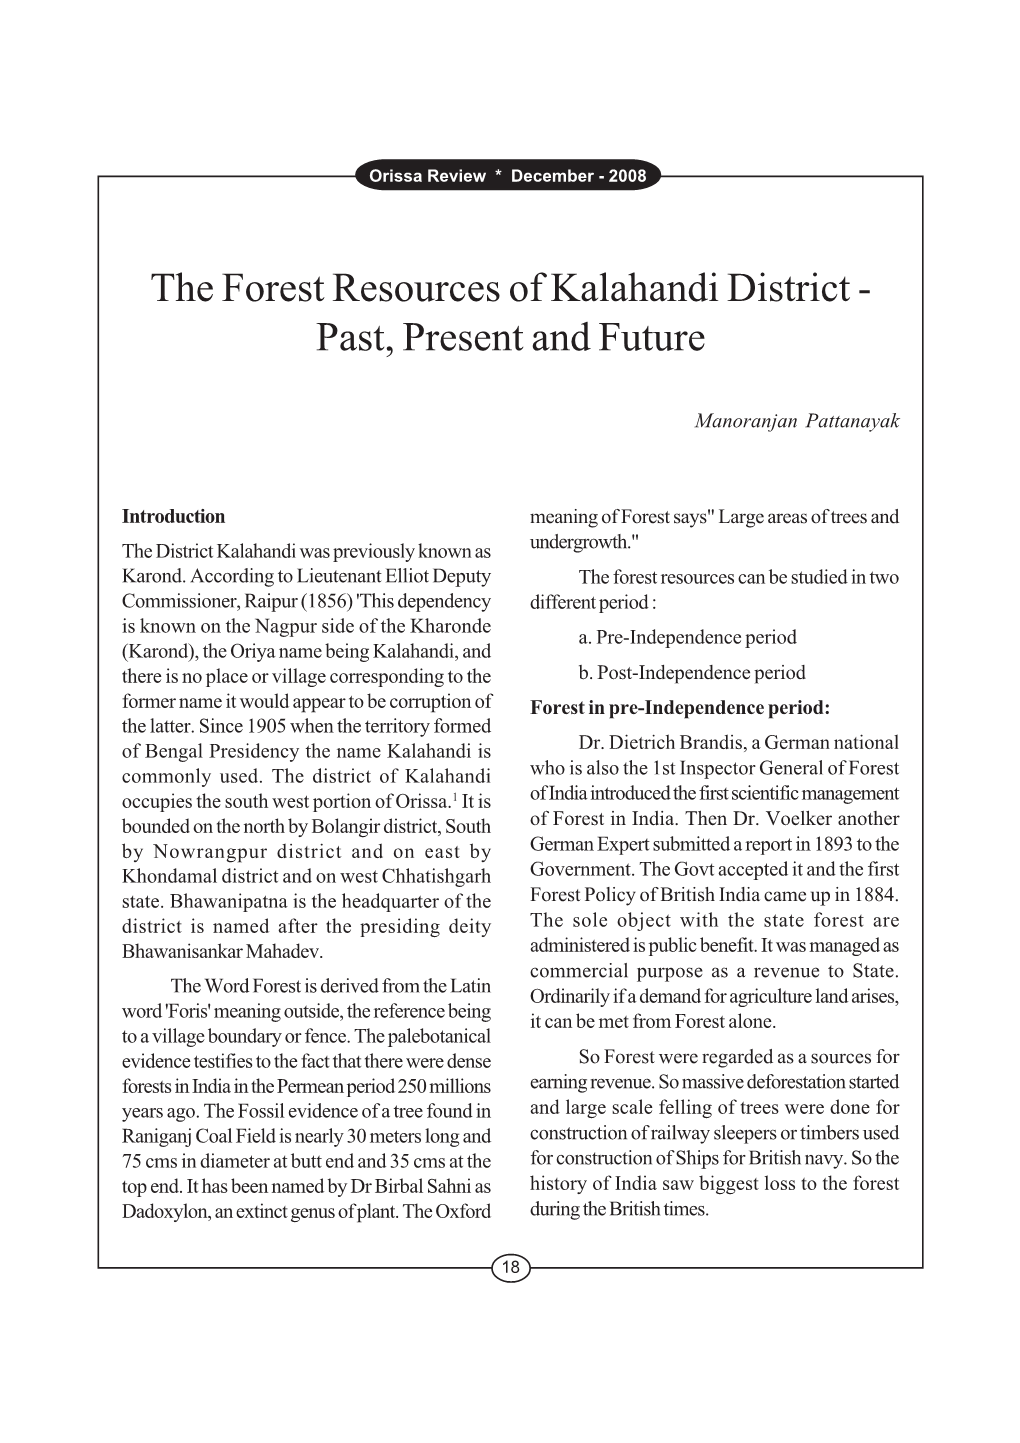 The Forest Resources of Kalahandi District - Past, Present and Future